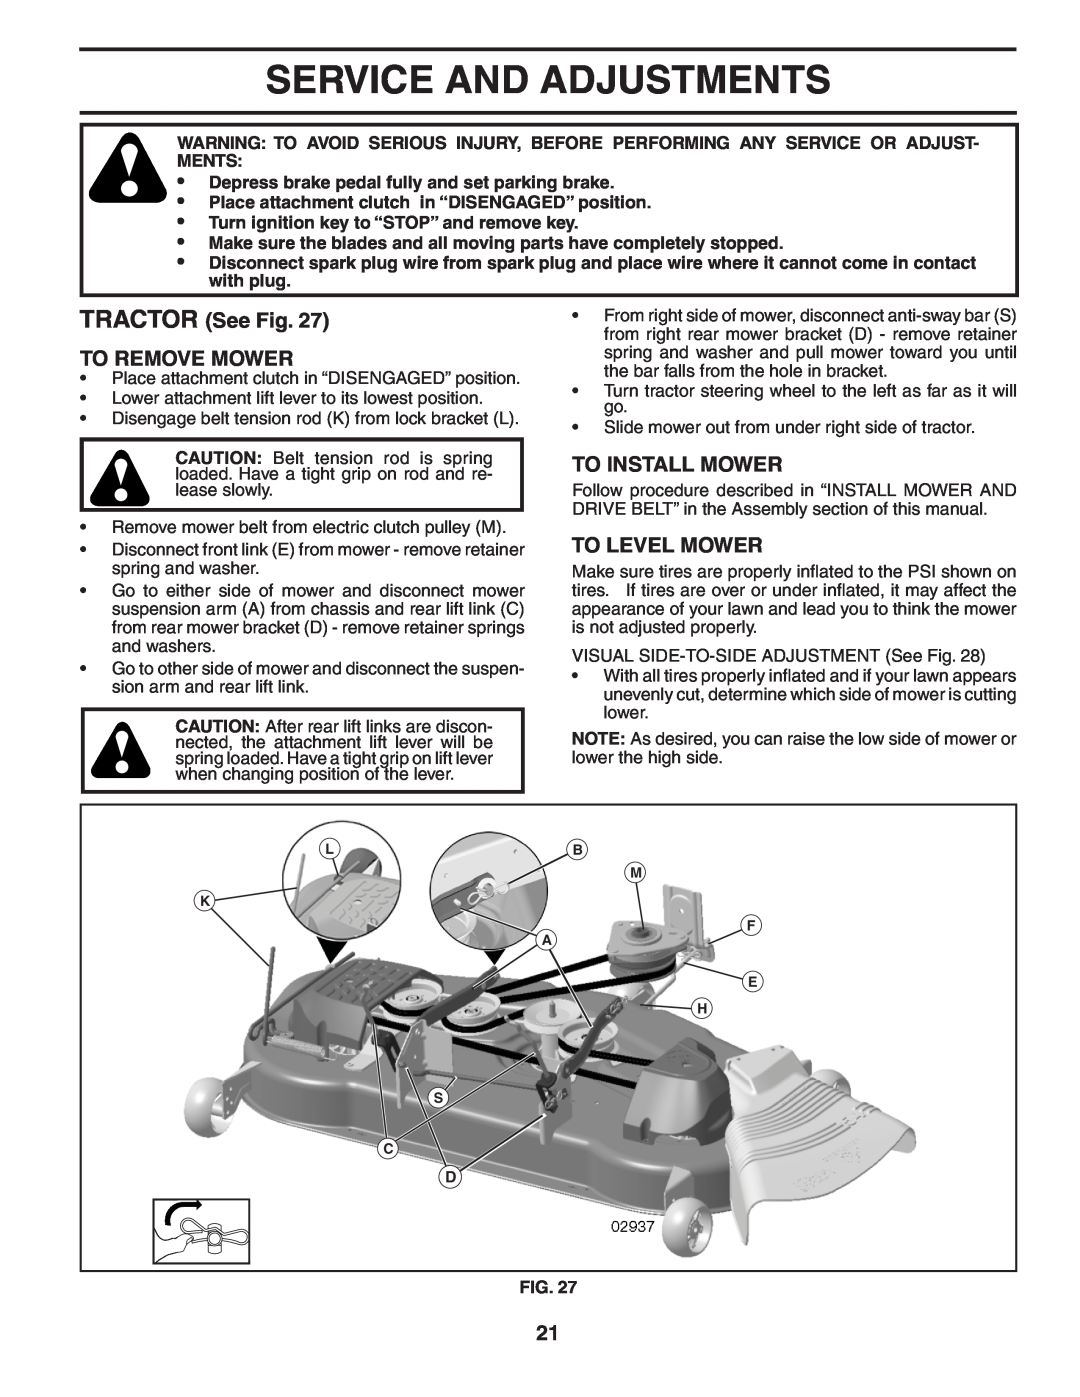 Husqvarna GTH26K54 owner manual Service And Adjustments, TRACTOR See Fig TO REMOVE MOWER, To Install Mower, To Level Mower 